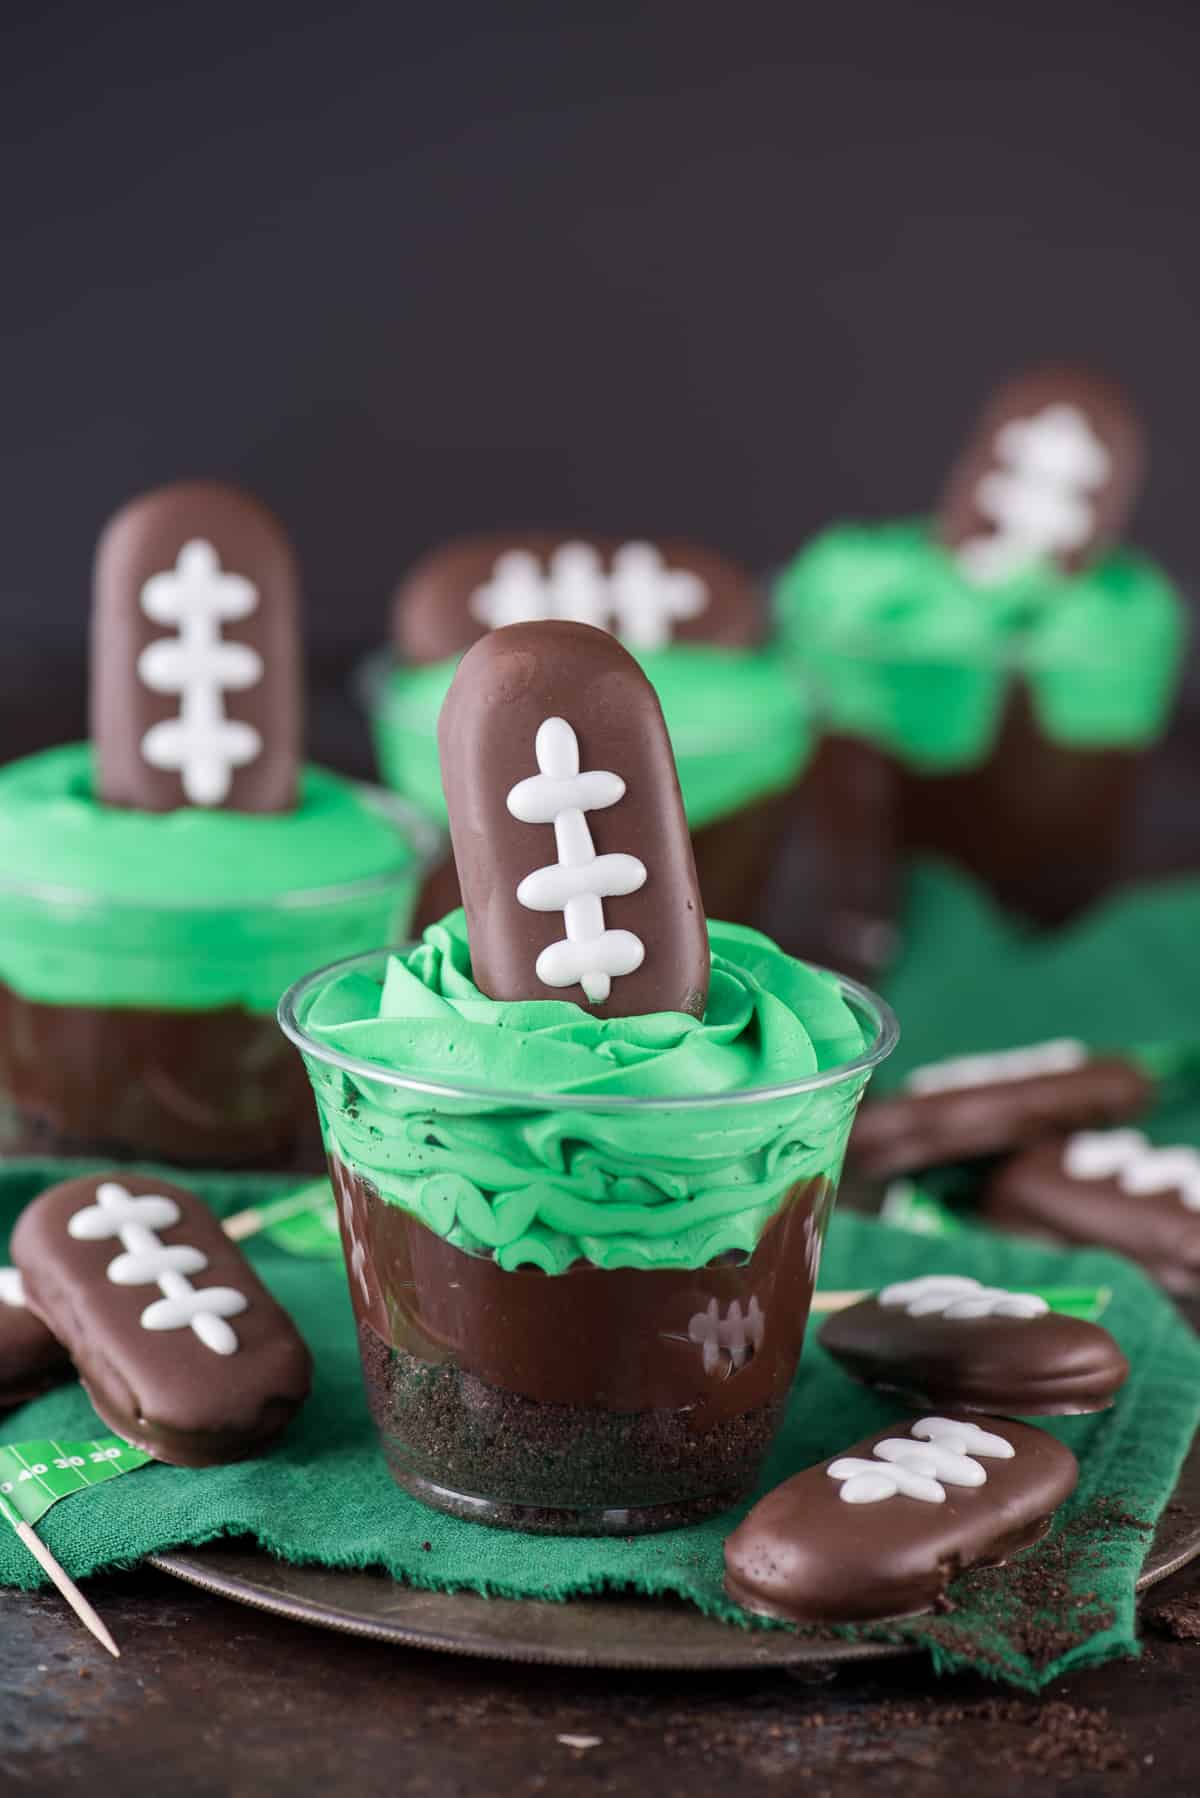 Football themed dirt cups - a fun football dessert to make for game day, super bowl, or a football themed birthday party! We made these and substituted football sprinkles for the football cookie on top.